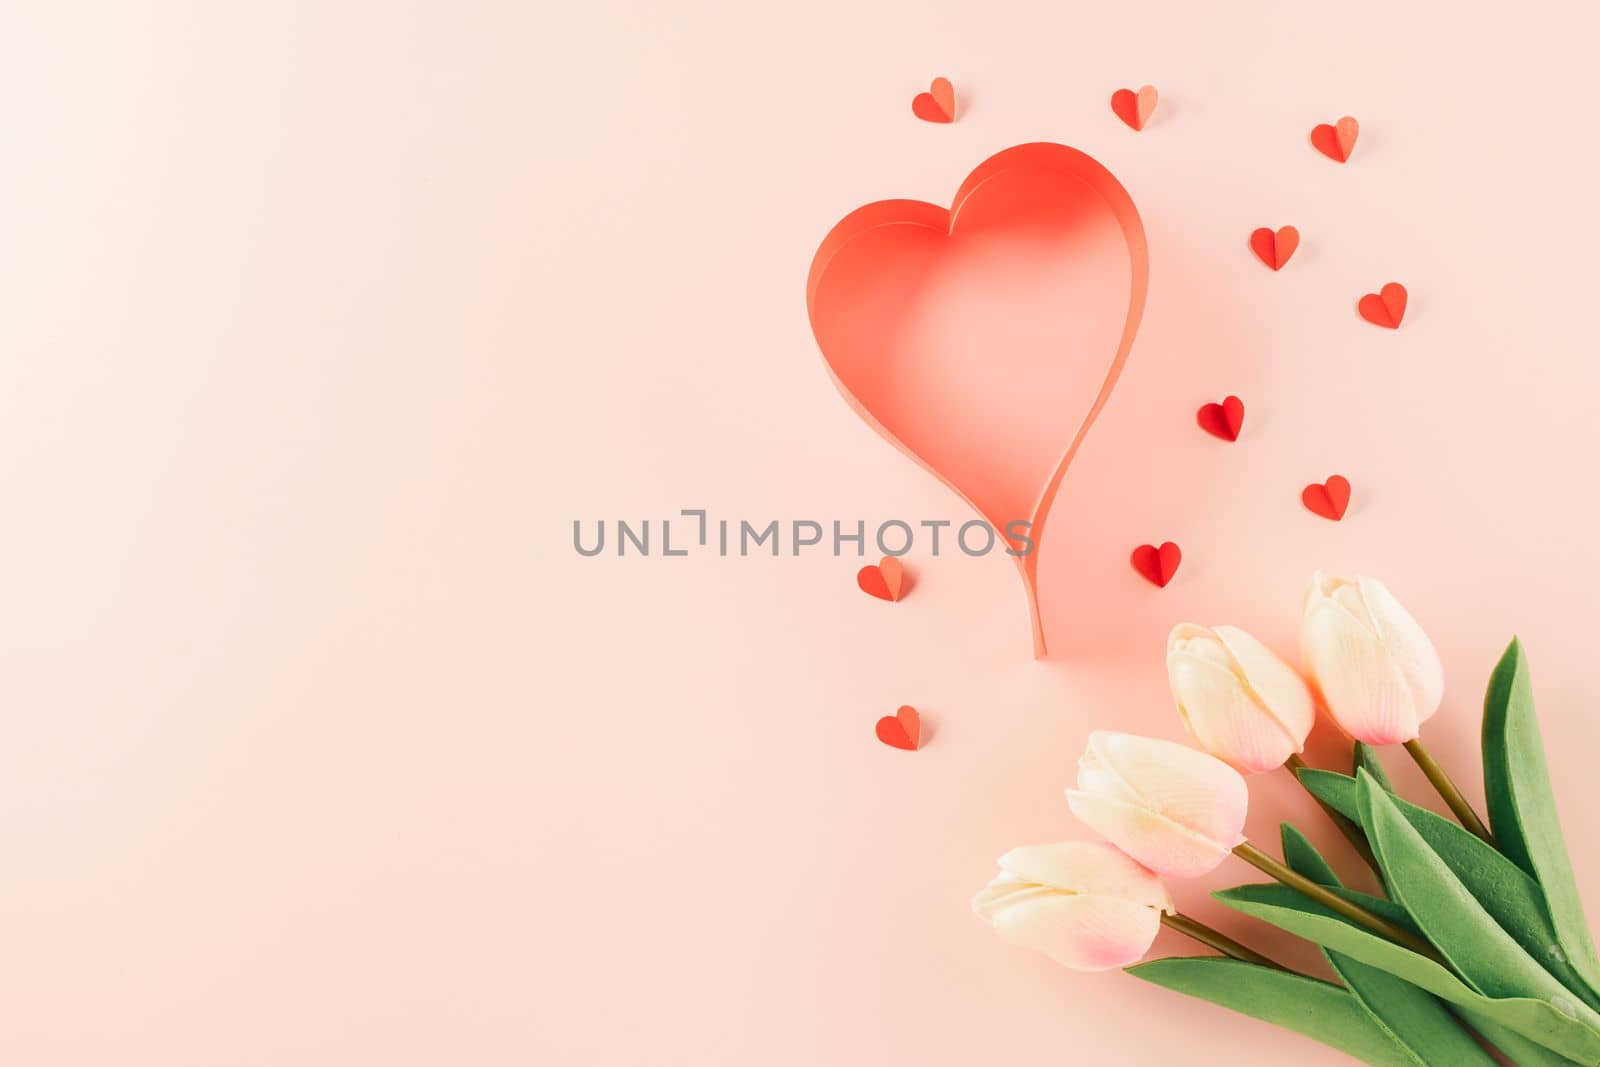 Happy Valentines Day background. Top view flat lay of red paper hearts shape and pink tulips flower on pink background with copy space, Valentine day concept, Banner of holiday